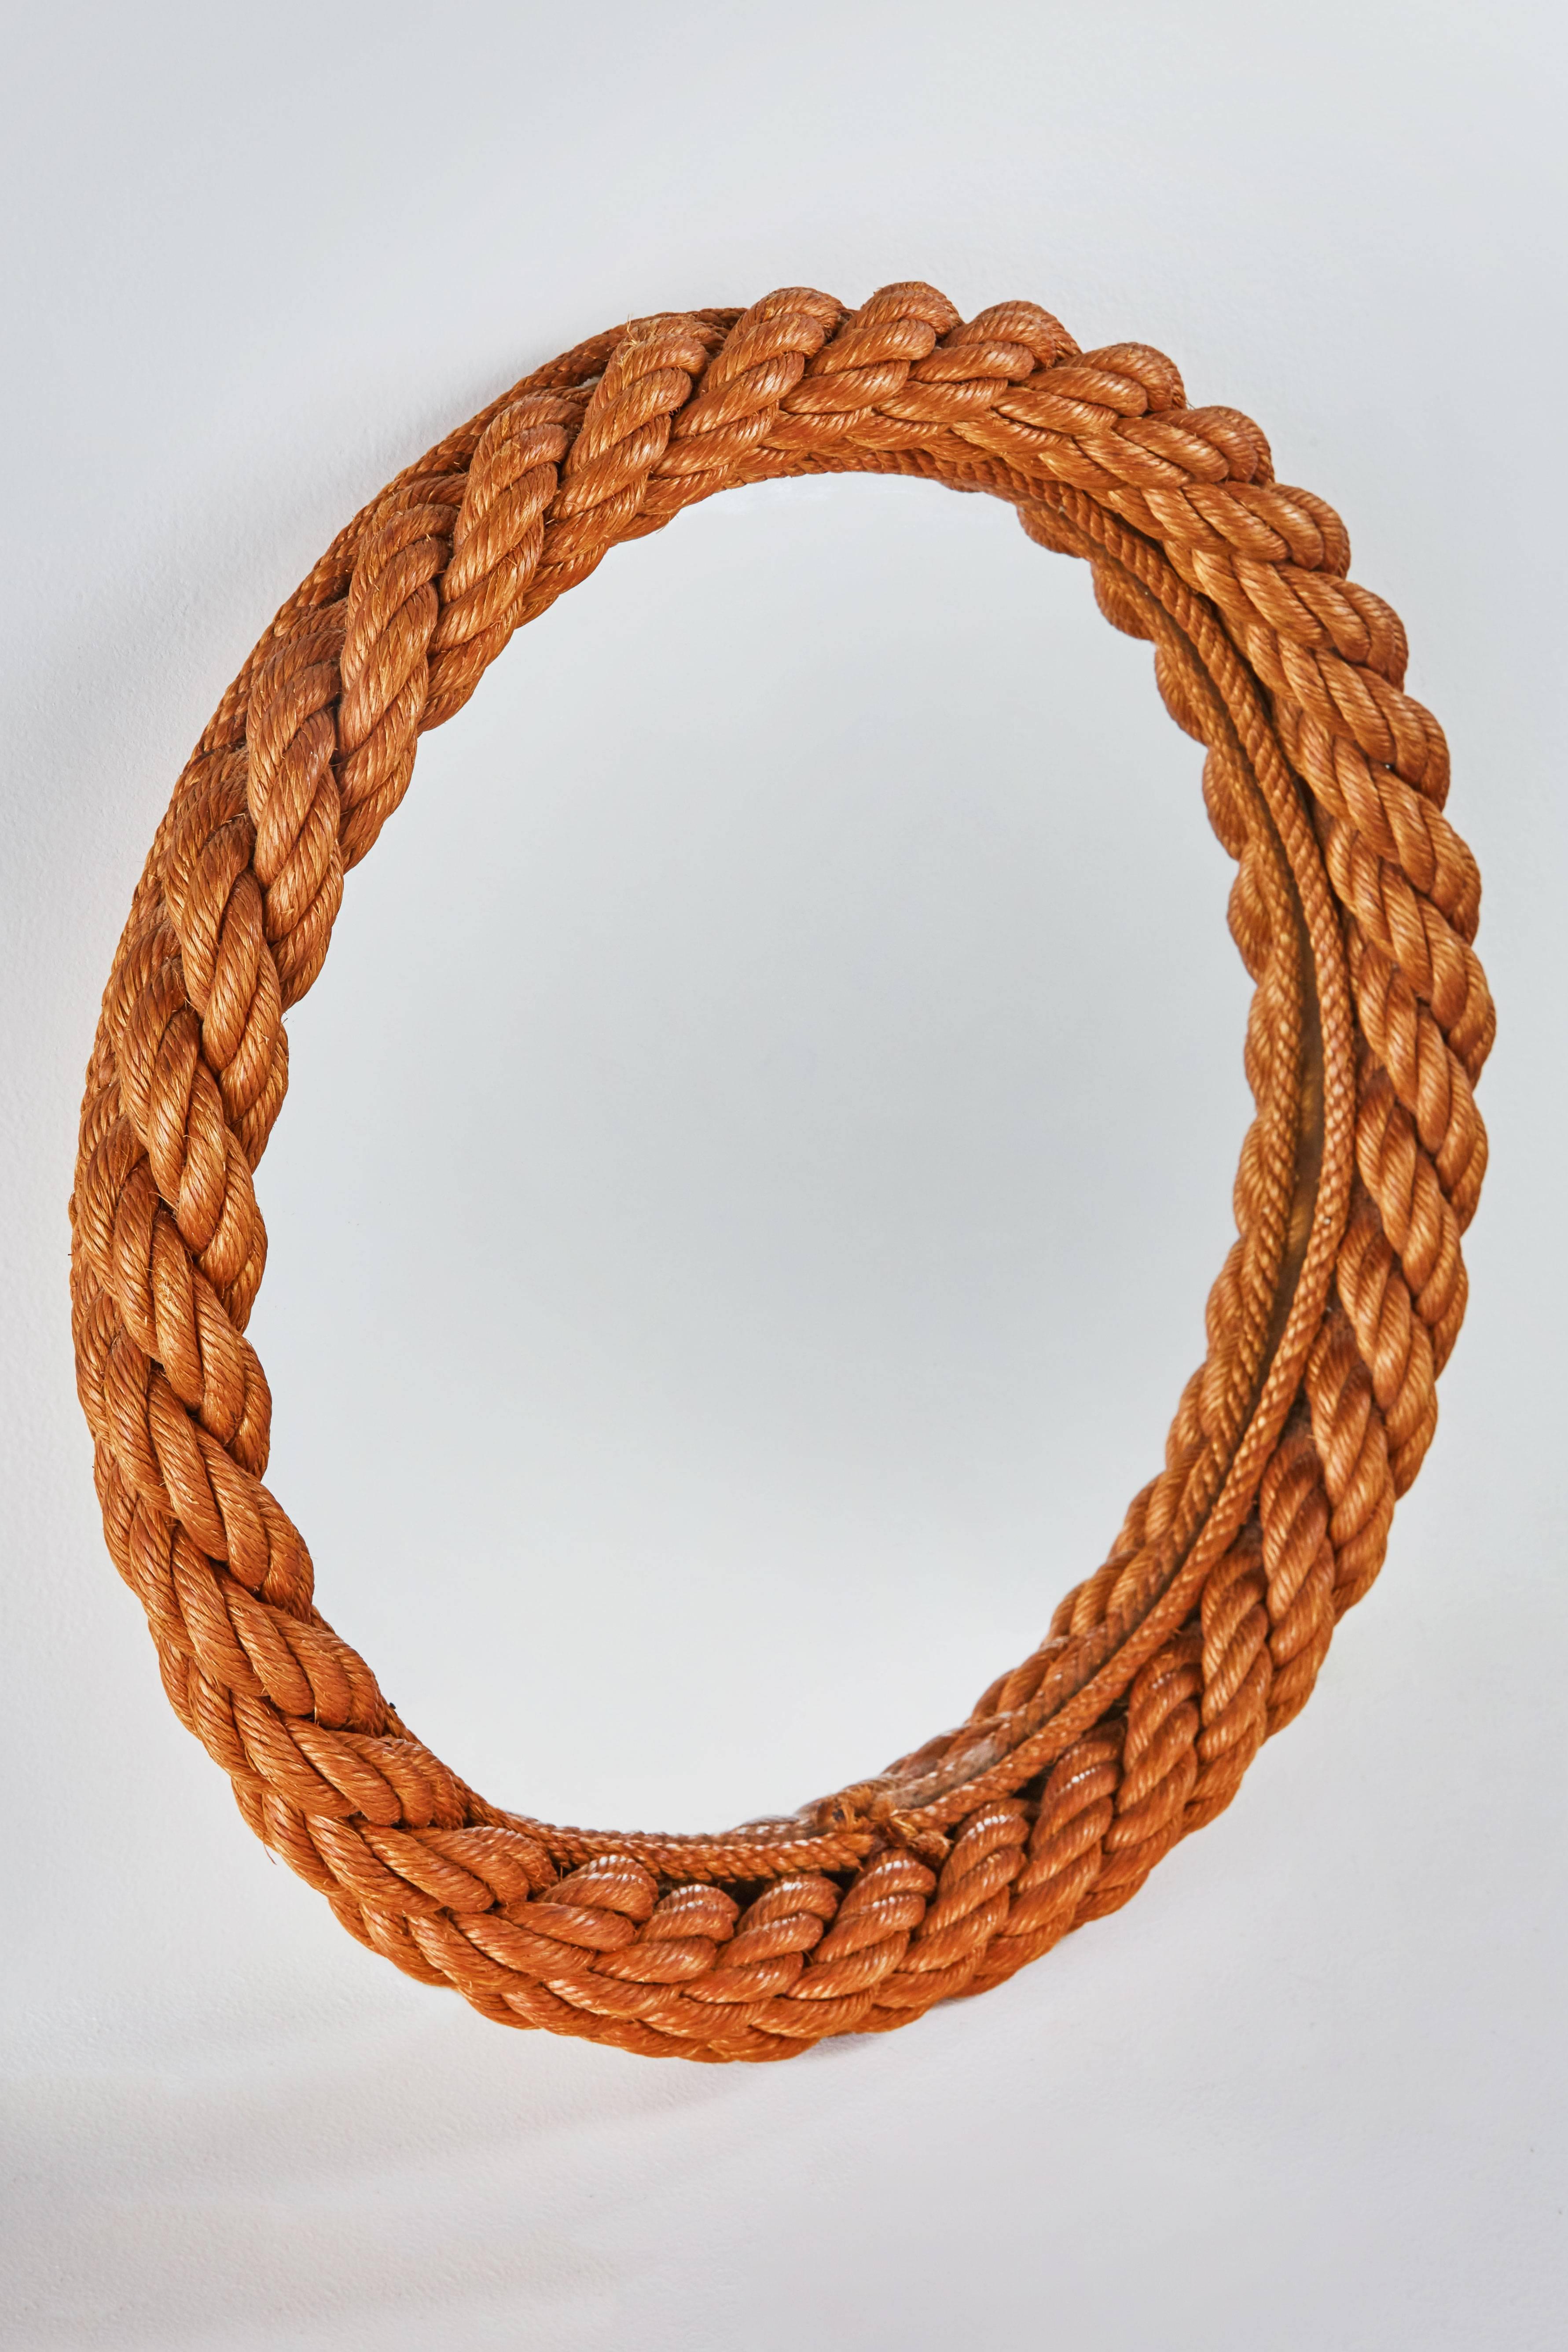 Circular rope mirror by Audoux-Minet. Simple frame made of woven abaca in Golfe-Juan, France, circa 1950s.

One is slightly smaller at 17.5” diameter.

 